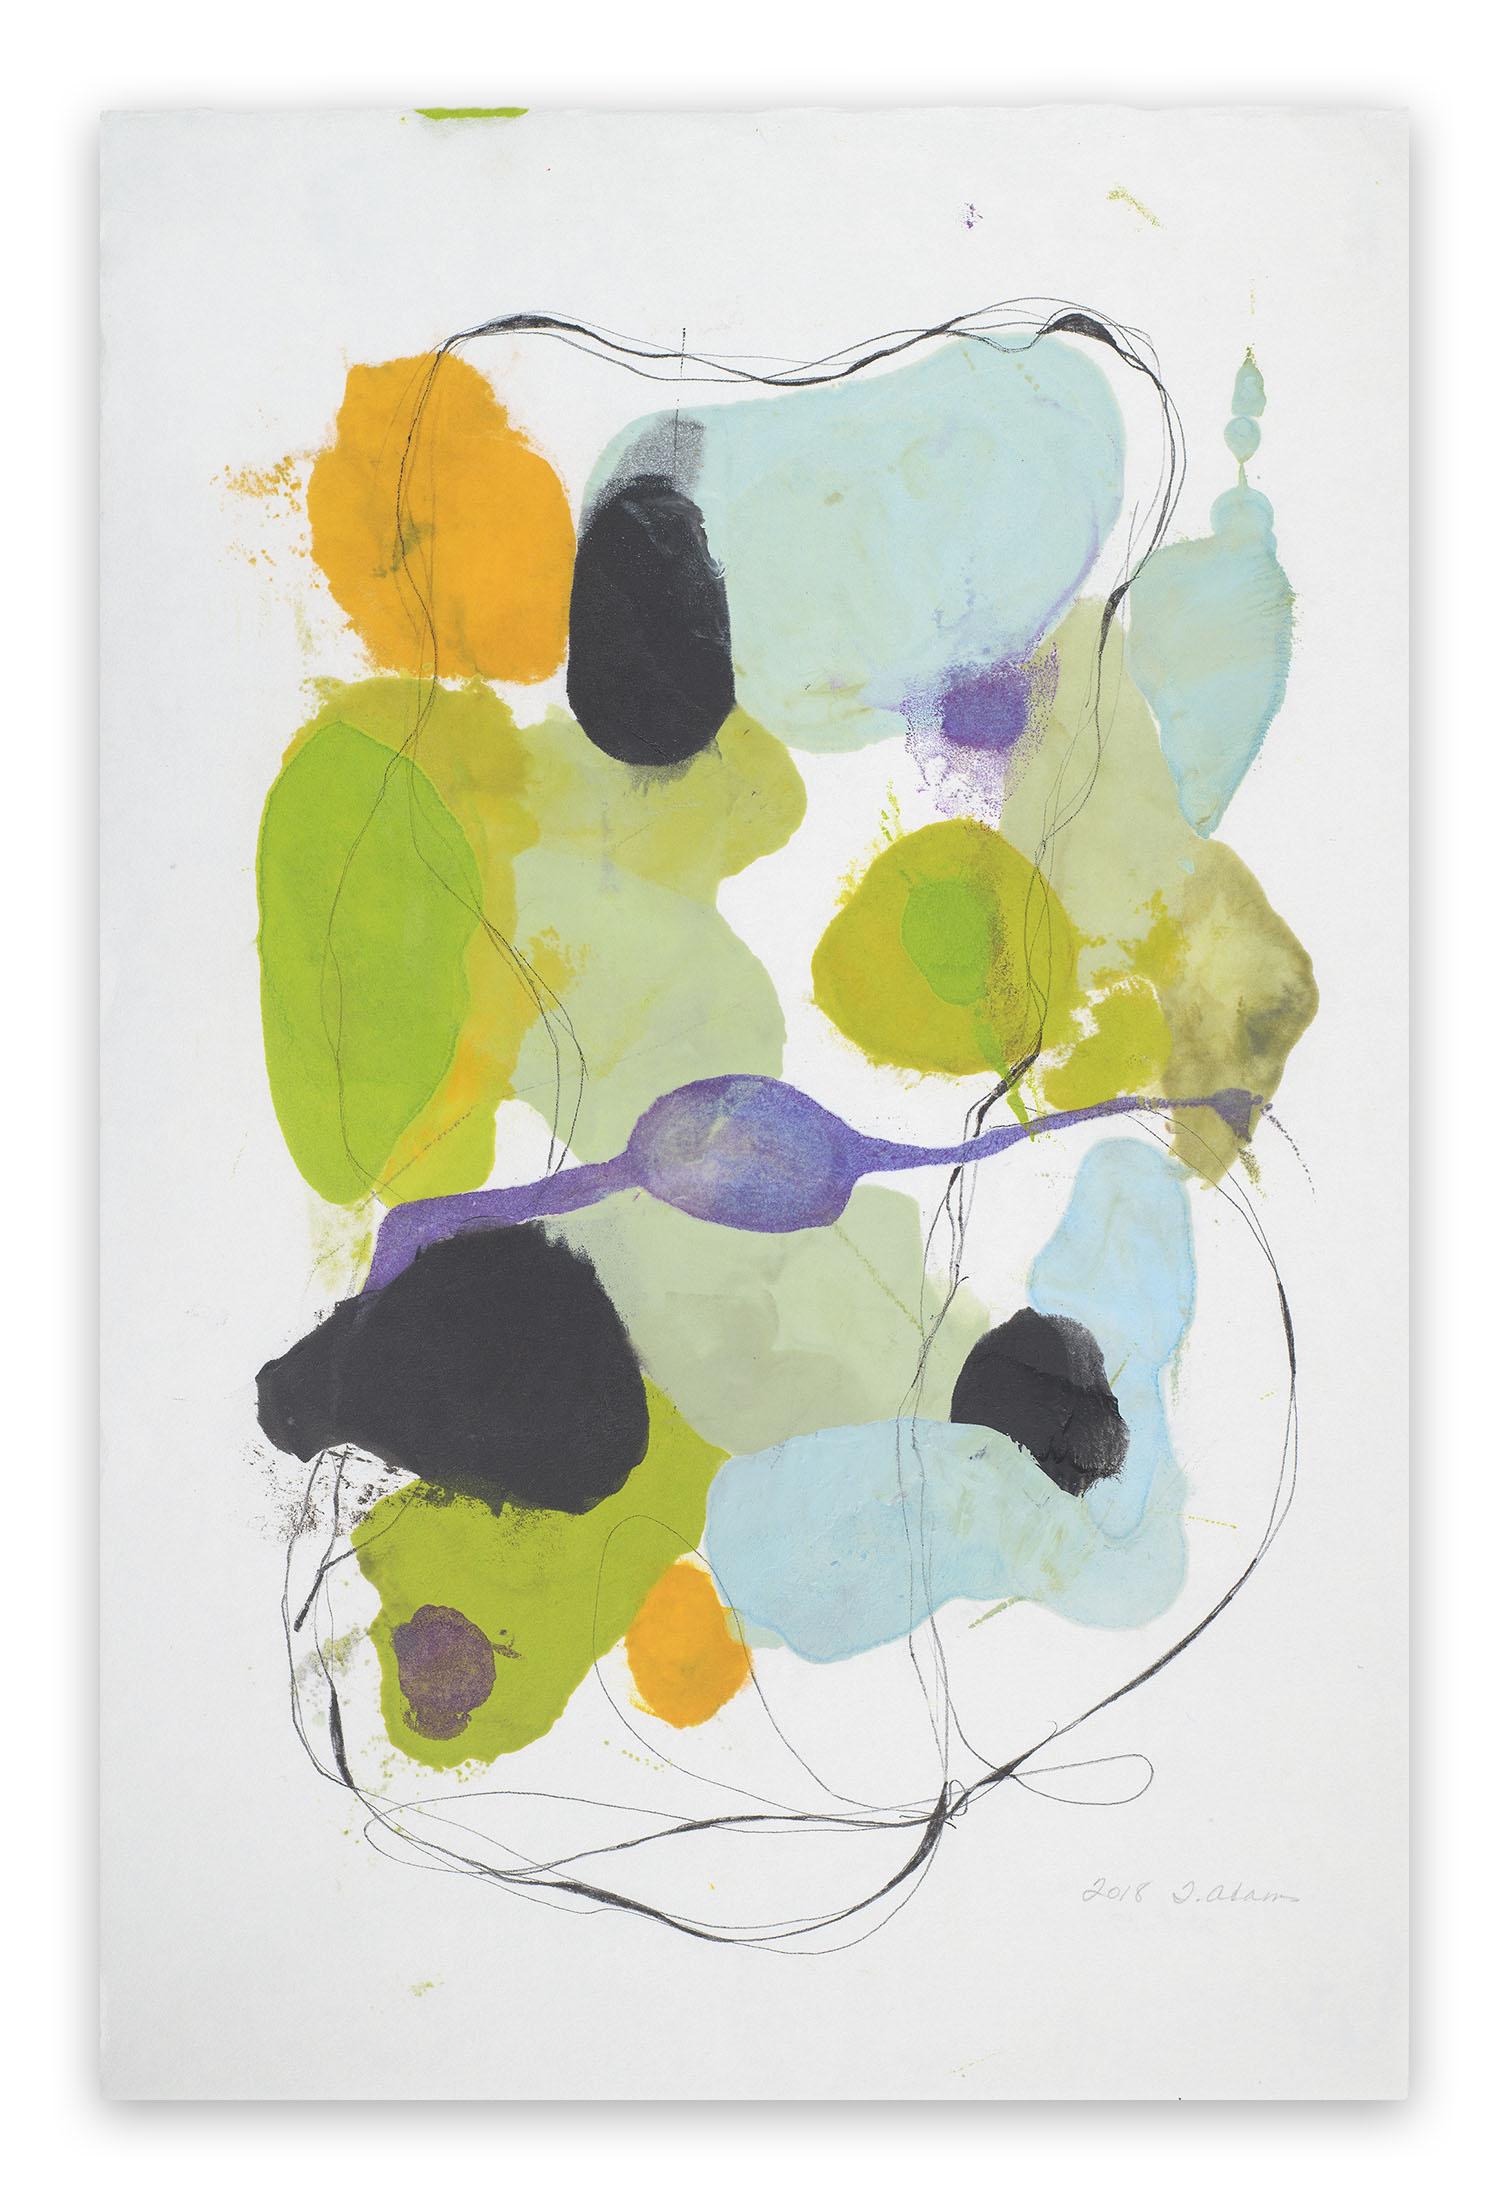 Abstract Painting Tracey Adams - 0118.13 (peinture abstraite)